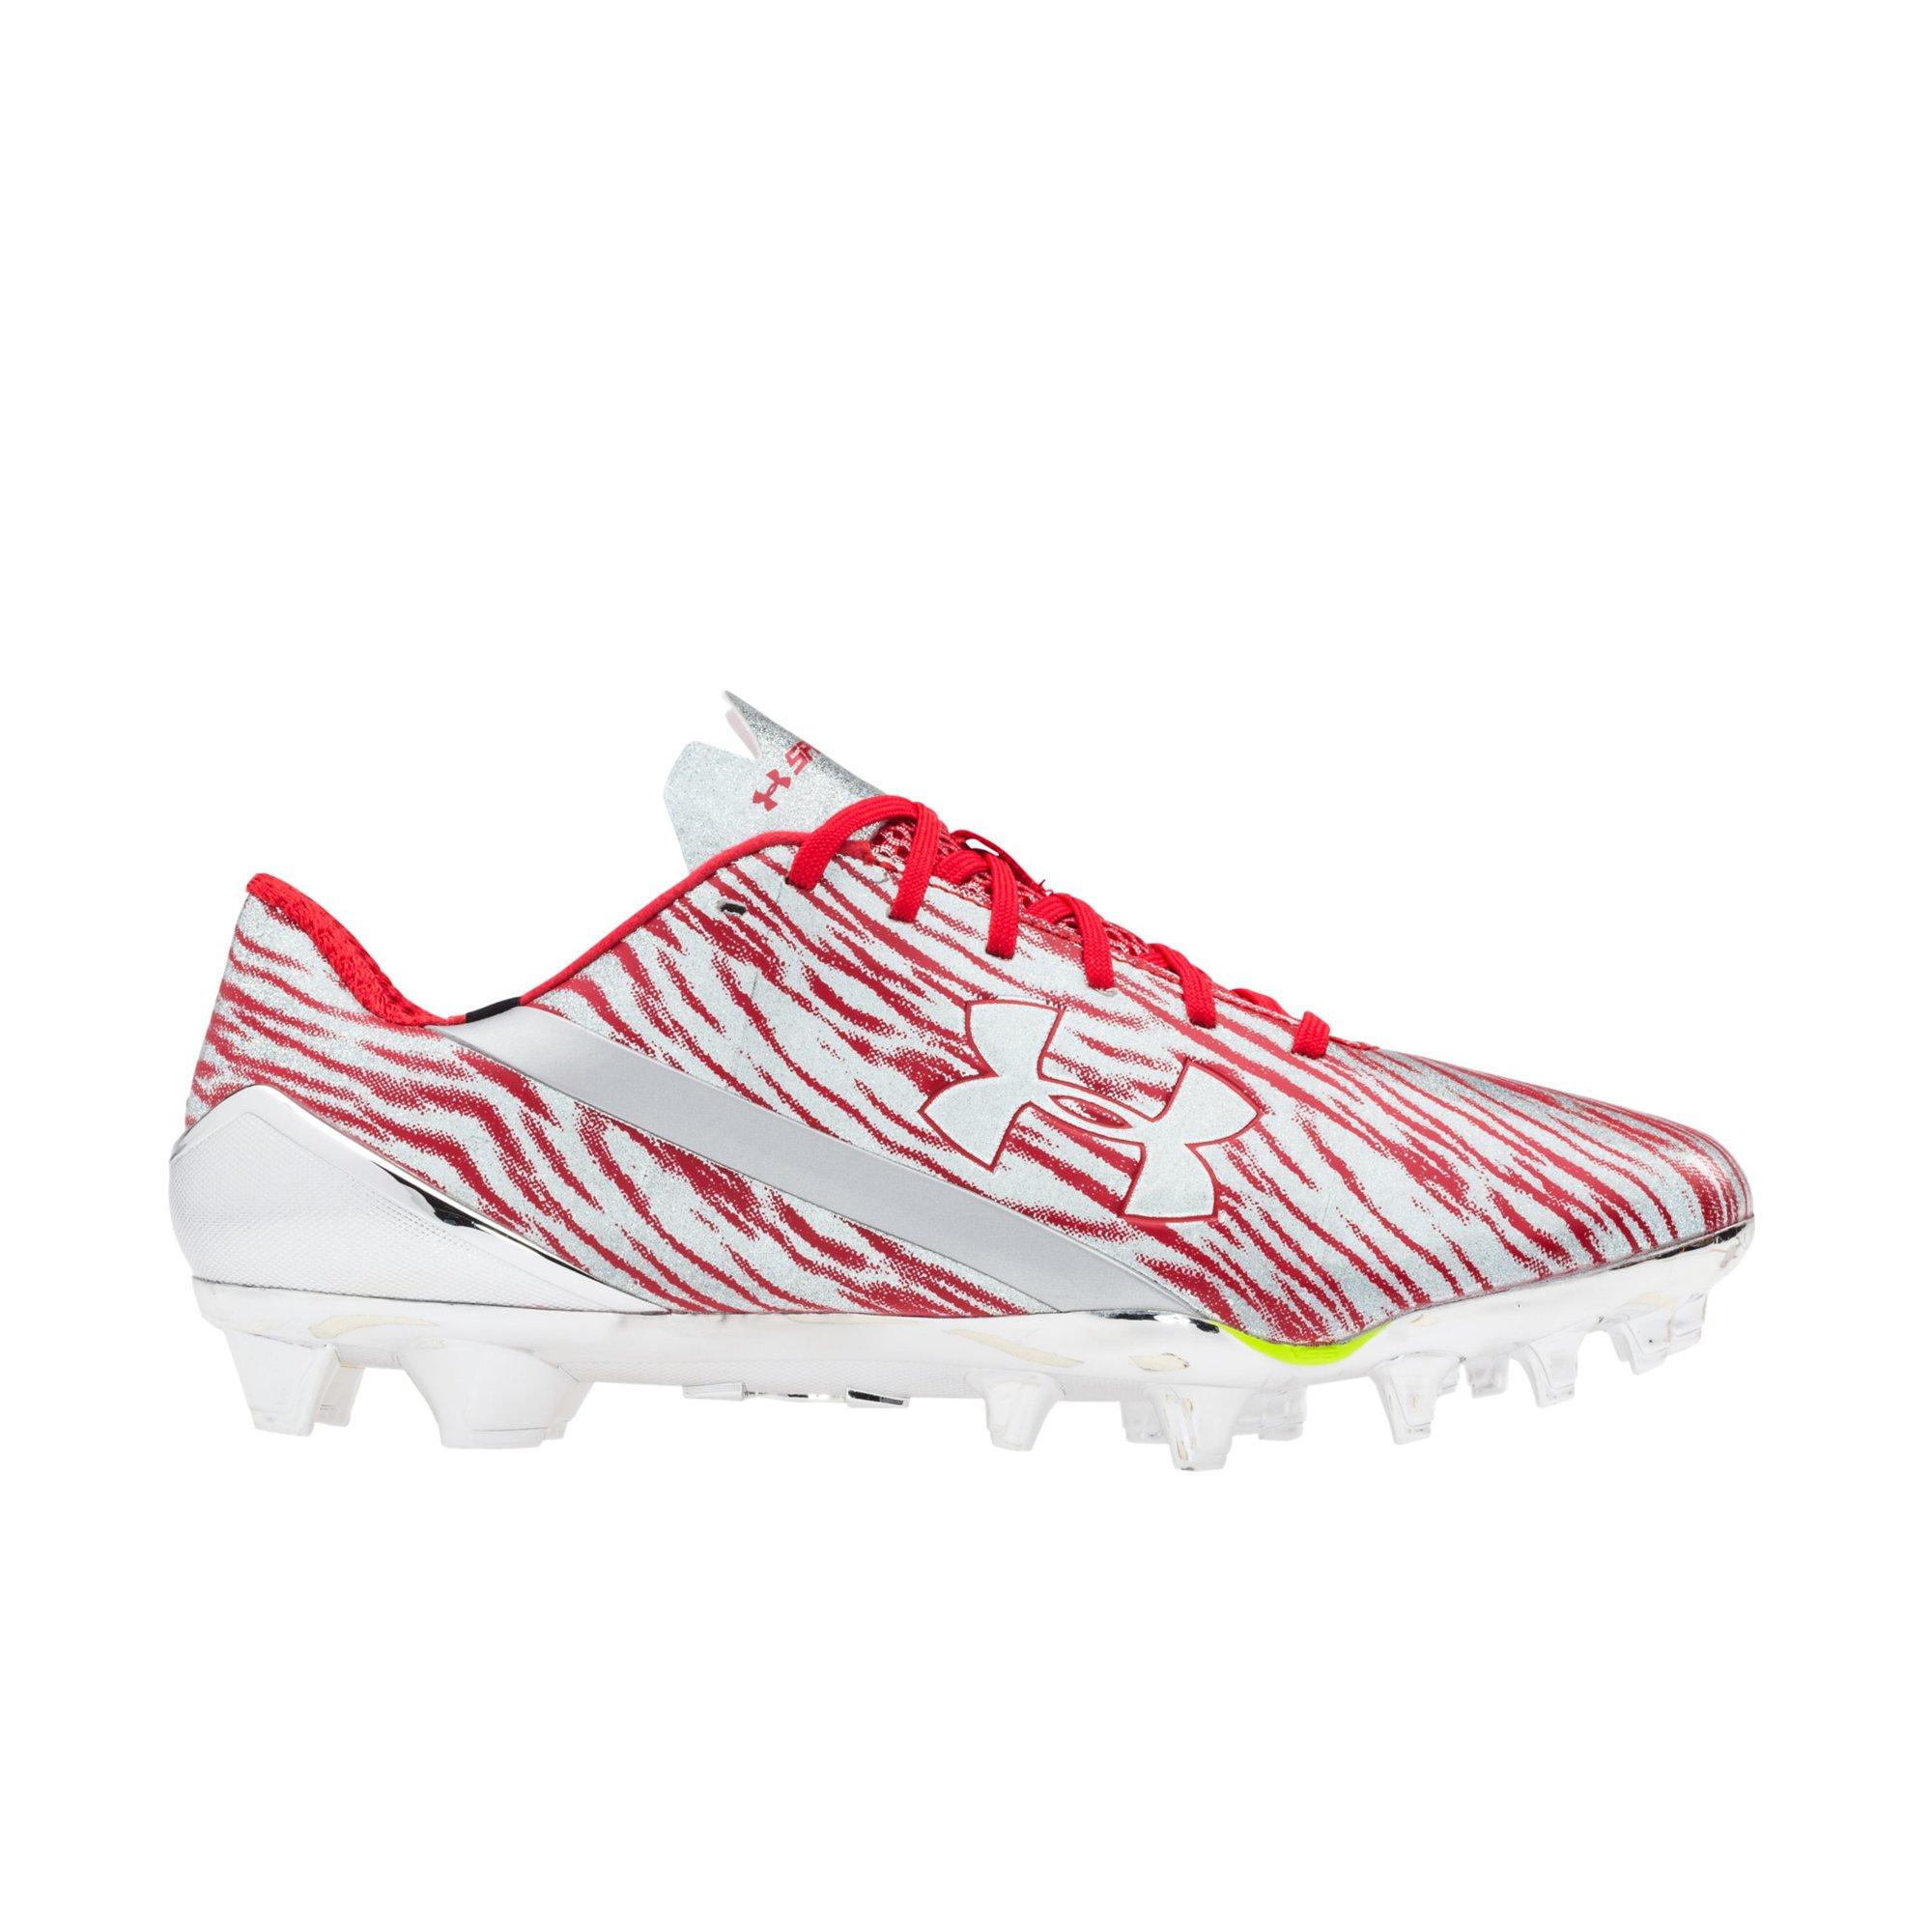 red under armour football cleats